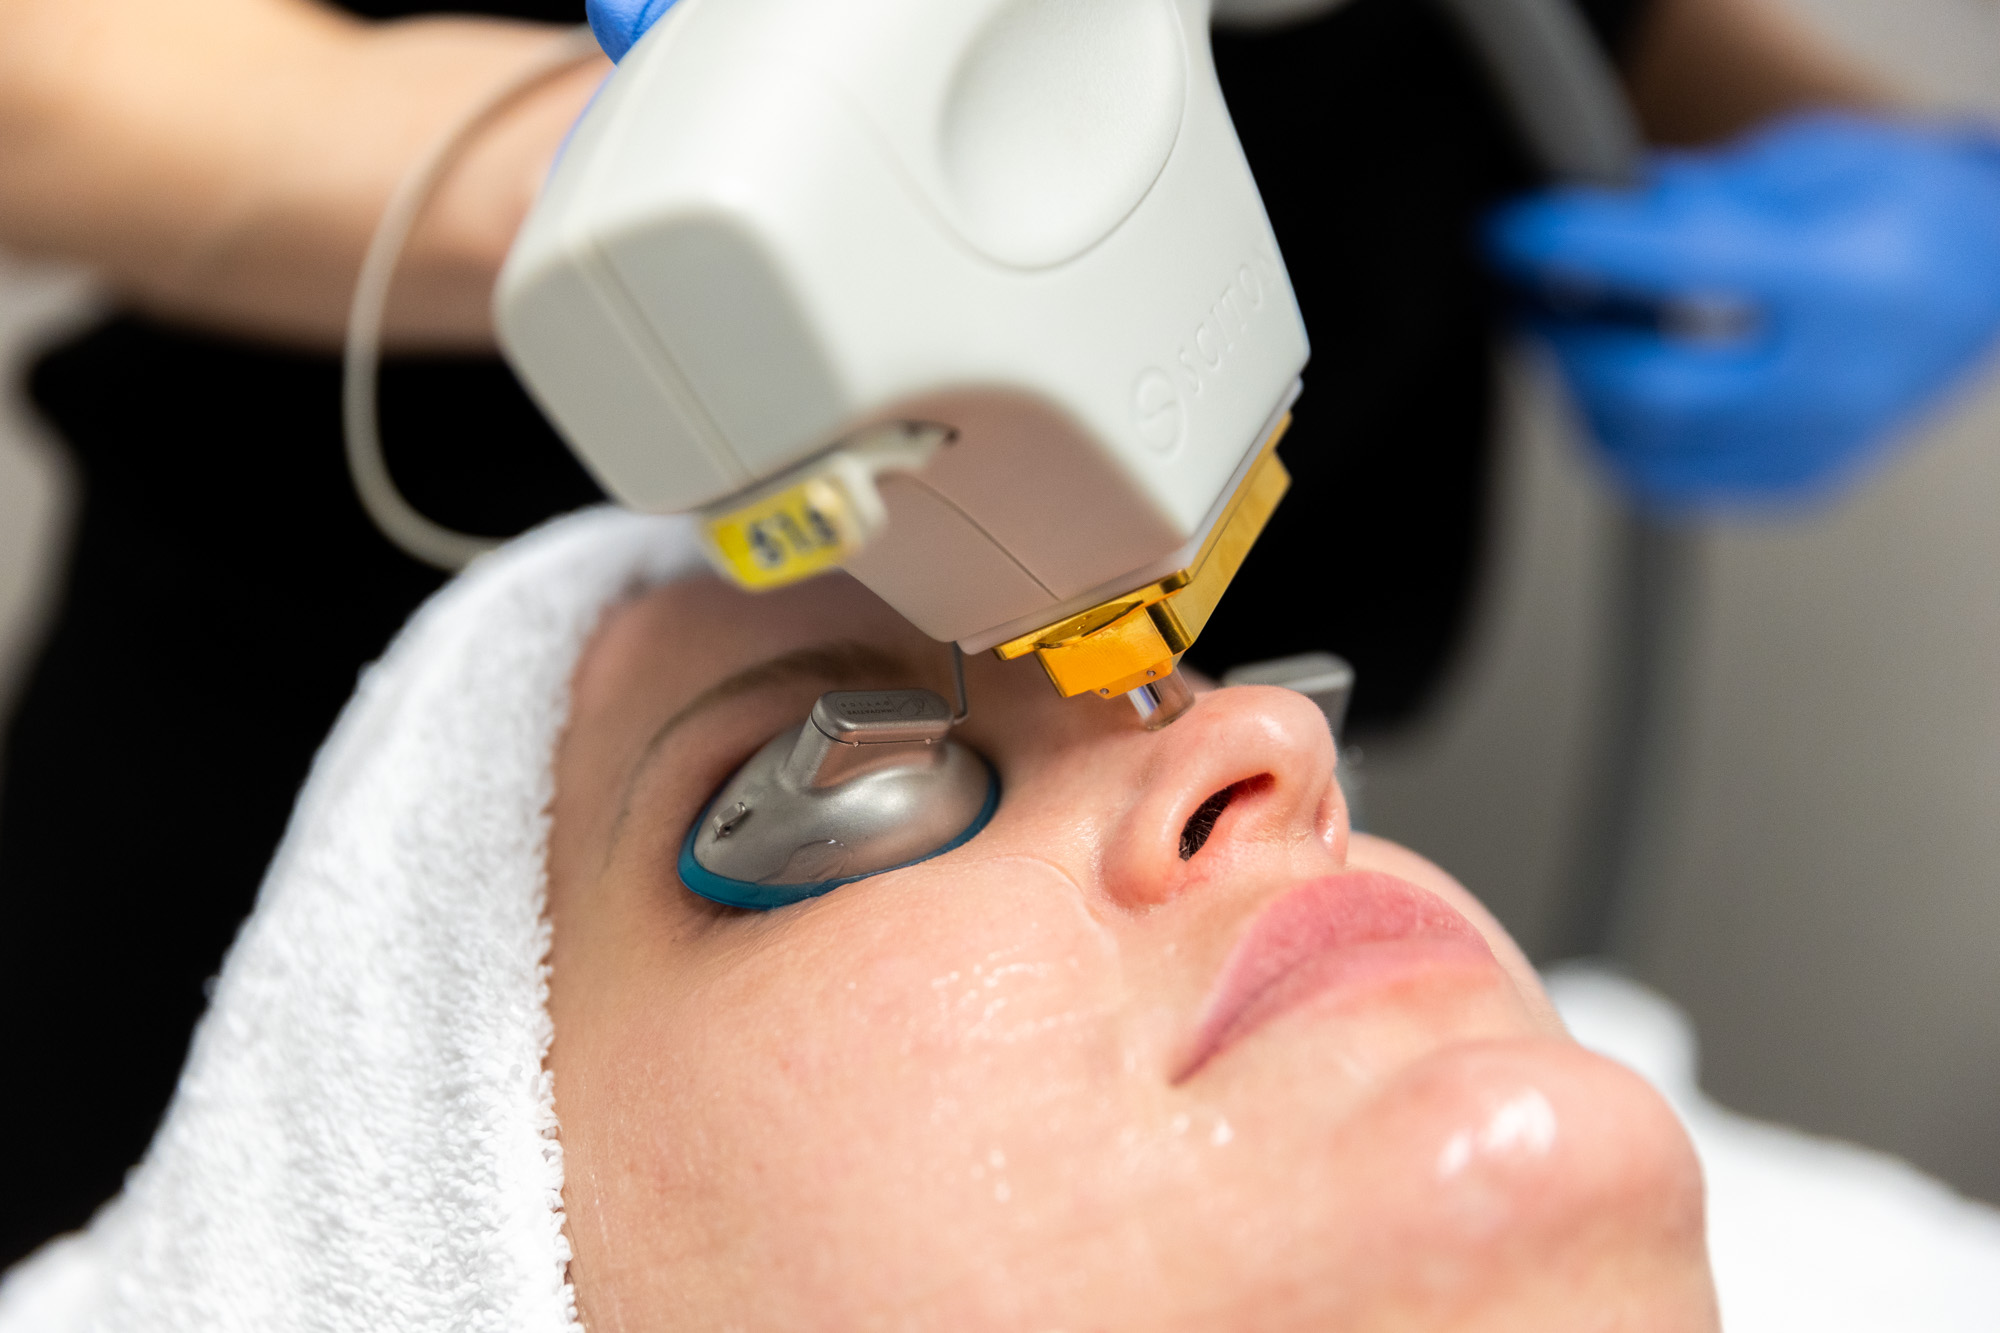 Close up of client receiving laser skin treatment on the bridge of their nose. They are wearing protective eye covers, and their face is covered in a thin layer of clear gel. Shot from right side of their face.